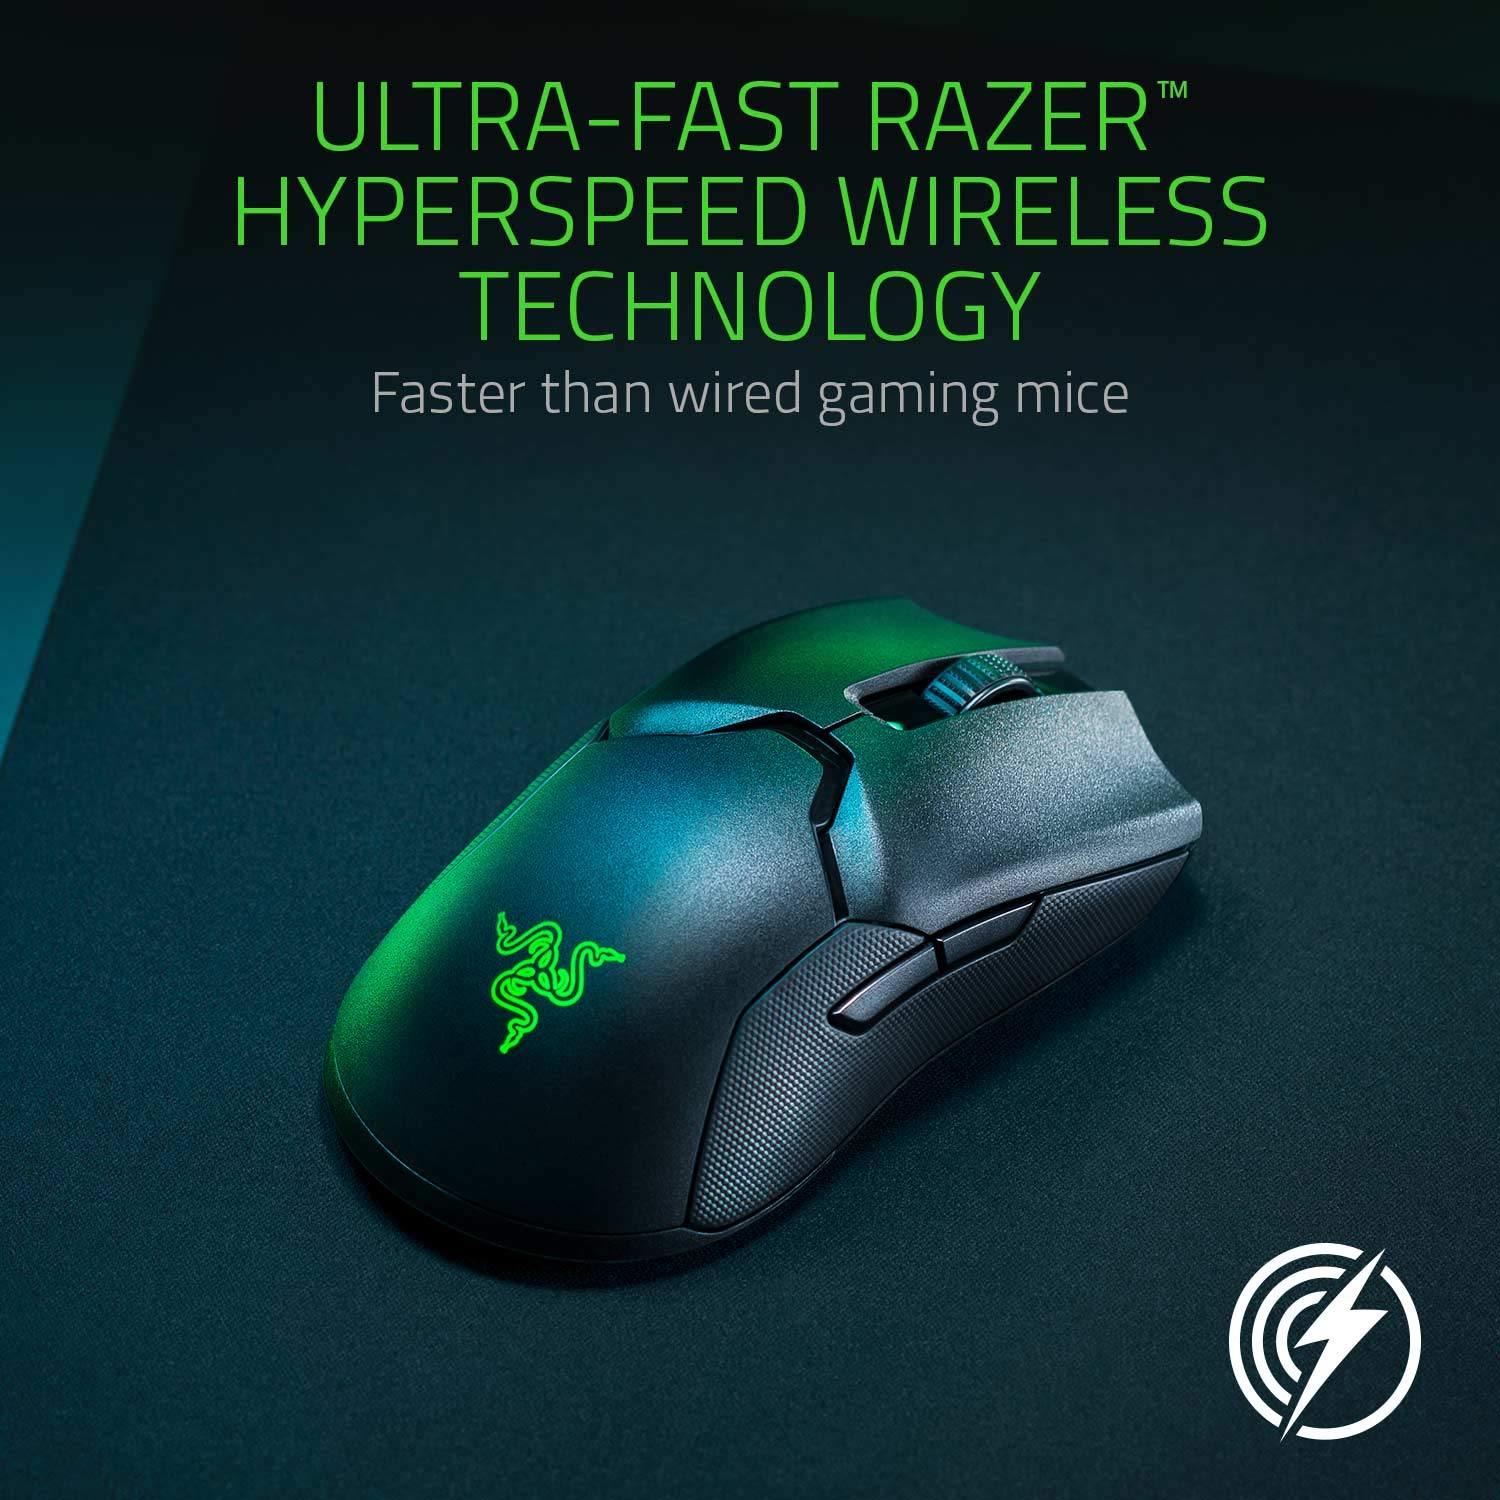 Razer Viper Ultimate Lightweight Wireless Gaming Mouse & RGB Charging Dock: Fastest Gaming Switches - 20K DPI Optical Sensor - Chroma Lighting - 8 Programmable Buttons - 70 Hr Battery - Classic Black - image 3 of 7